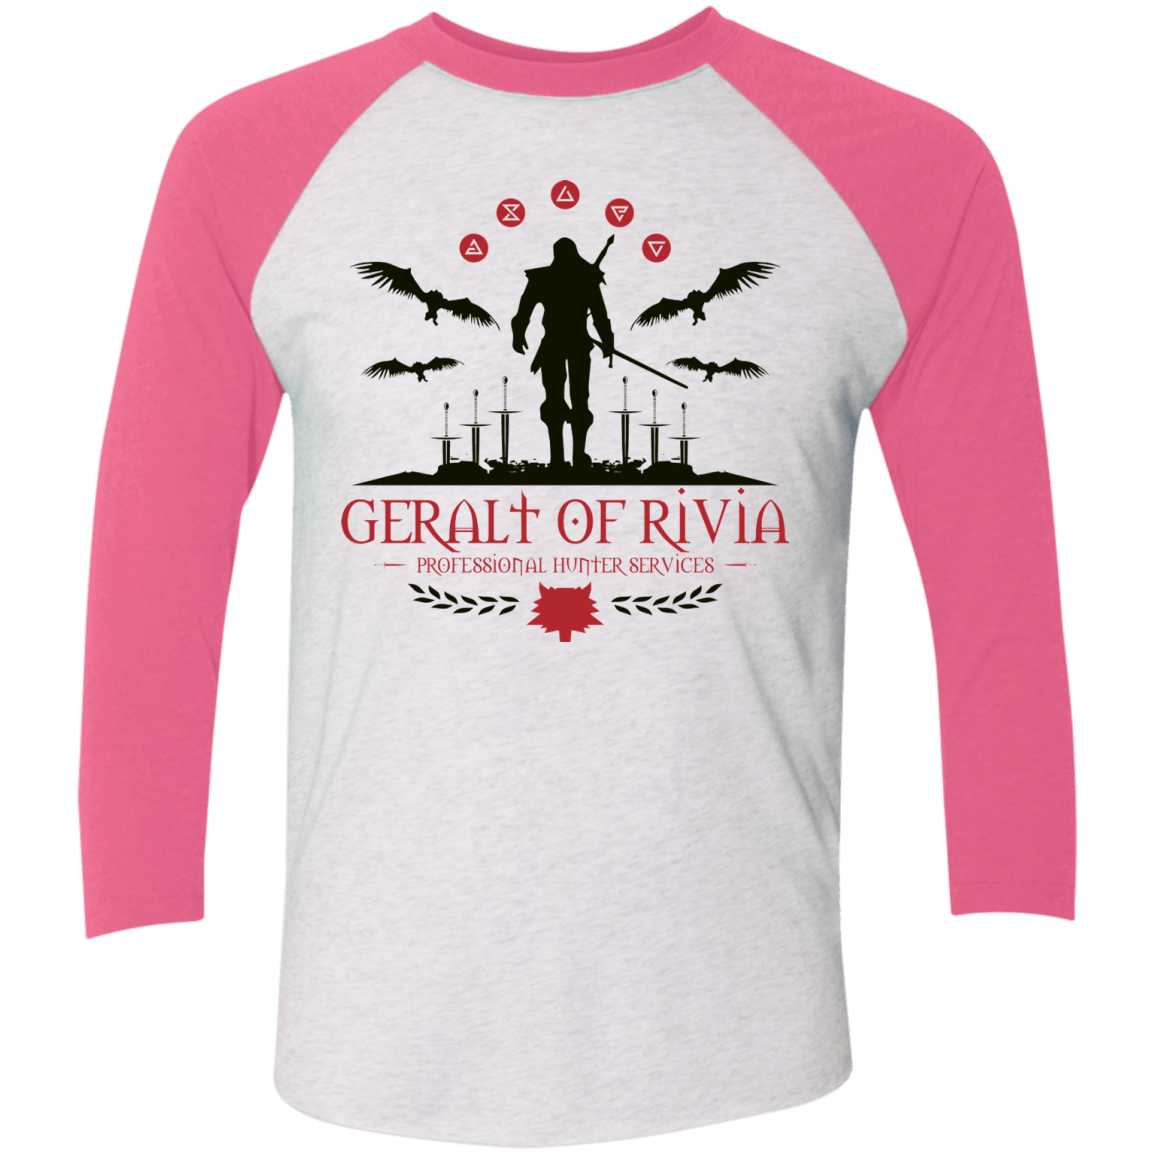 T-Shirts Heather White/Vintage Pink / X-Small The Witcher 3 Wild Hunt Men's Triblend 3/4 Sleeve